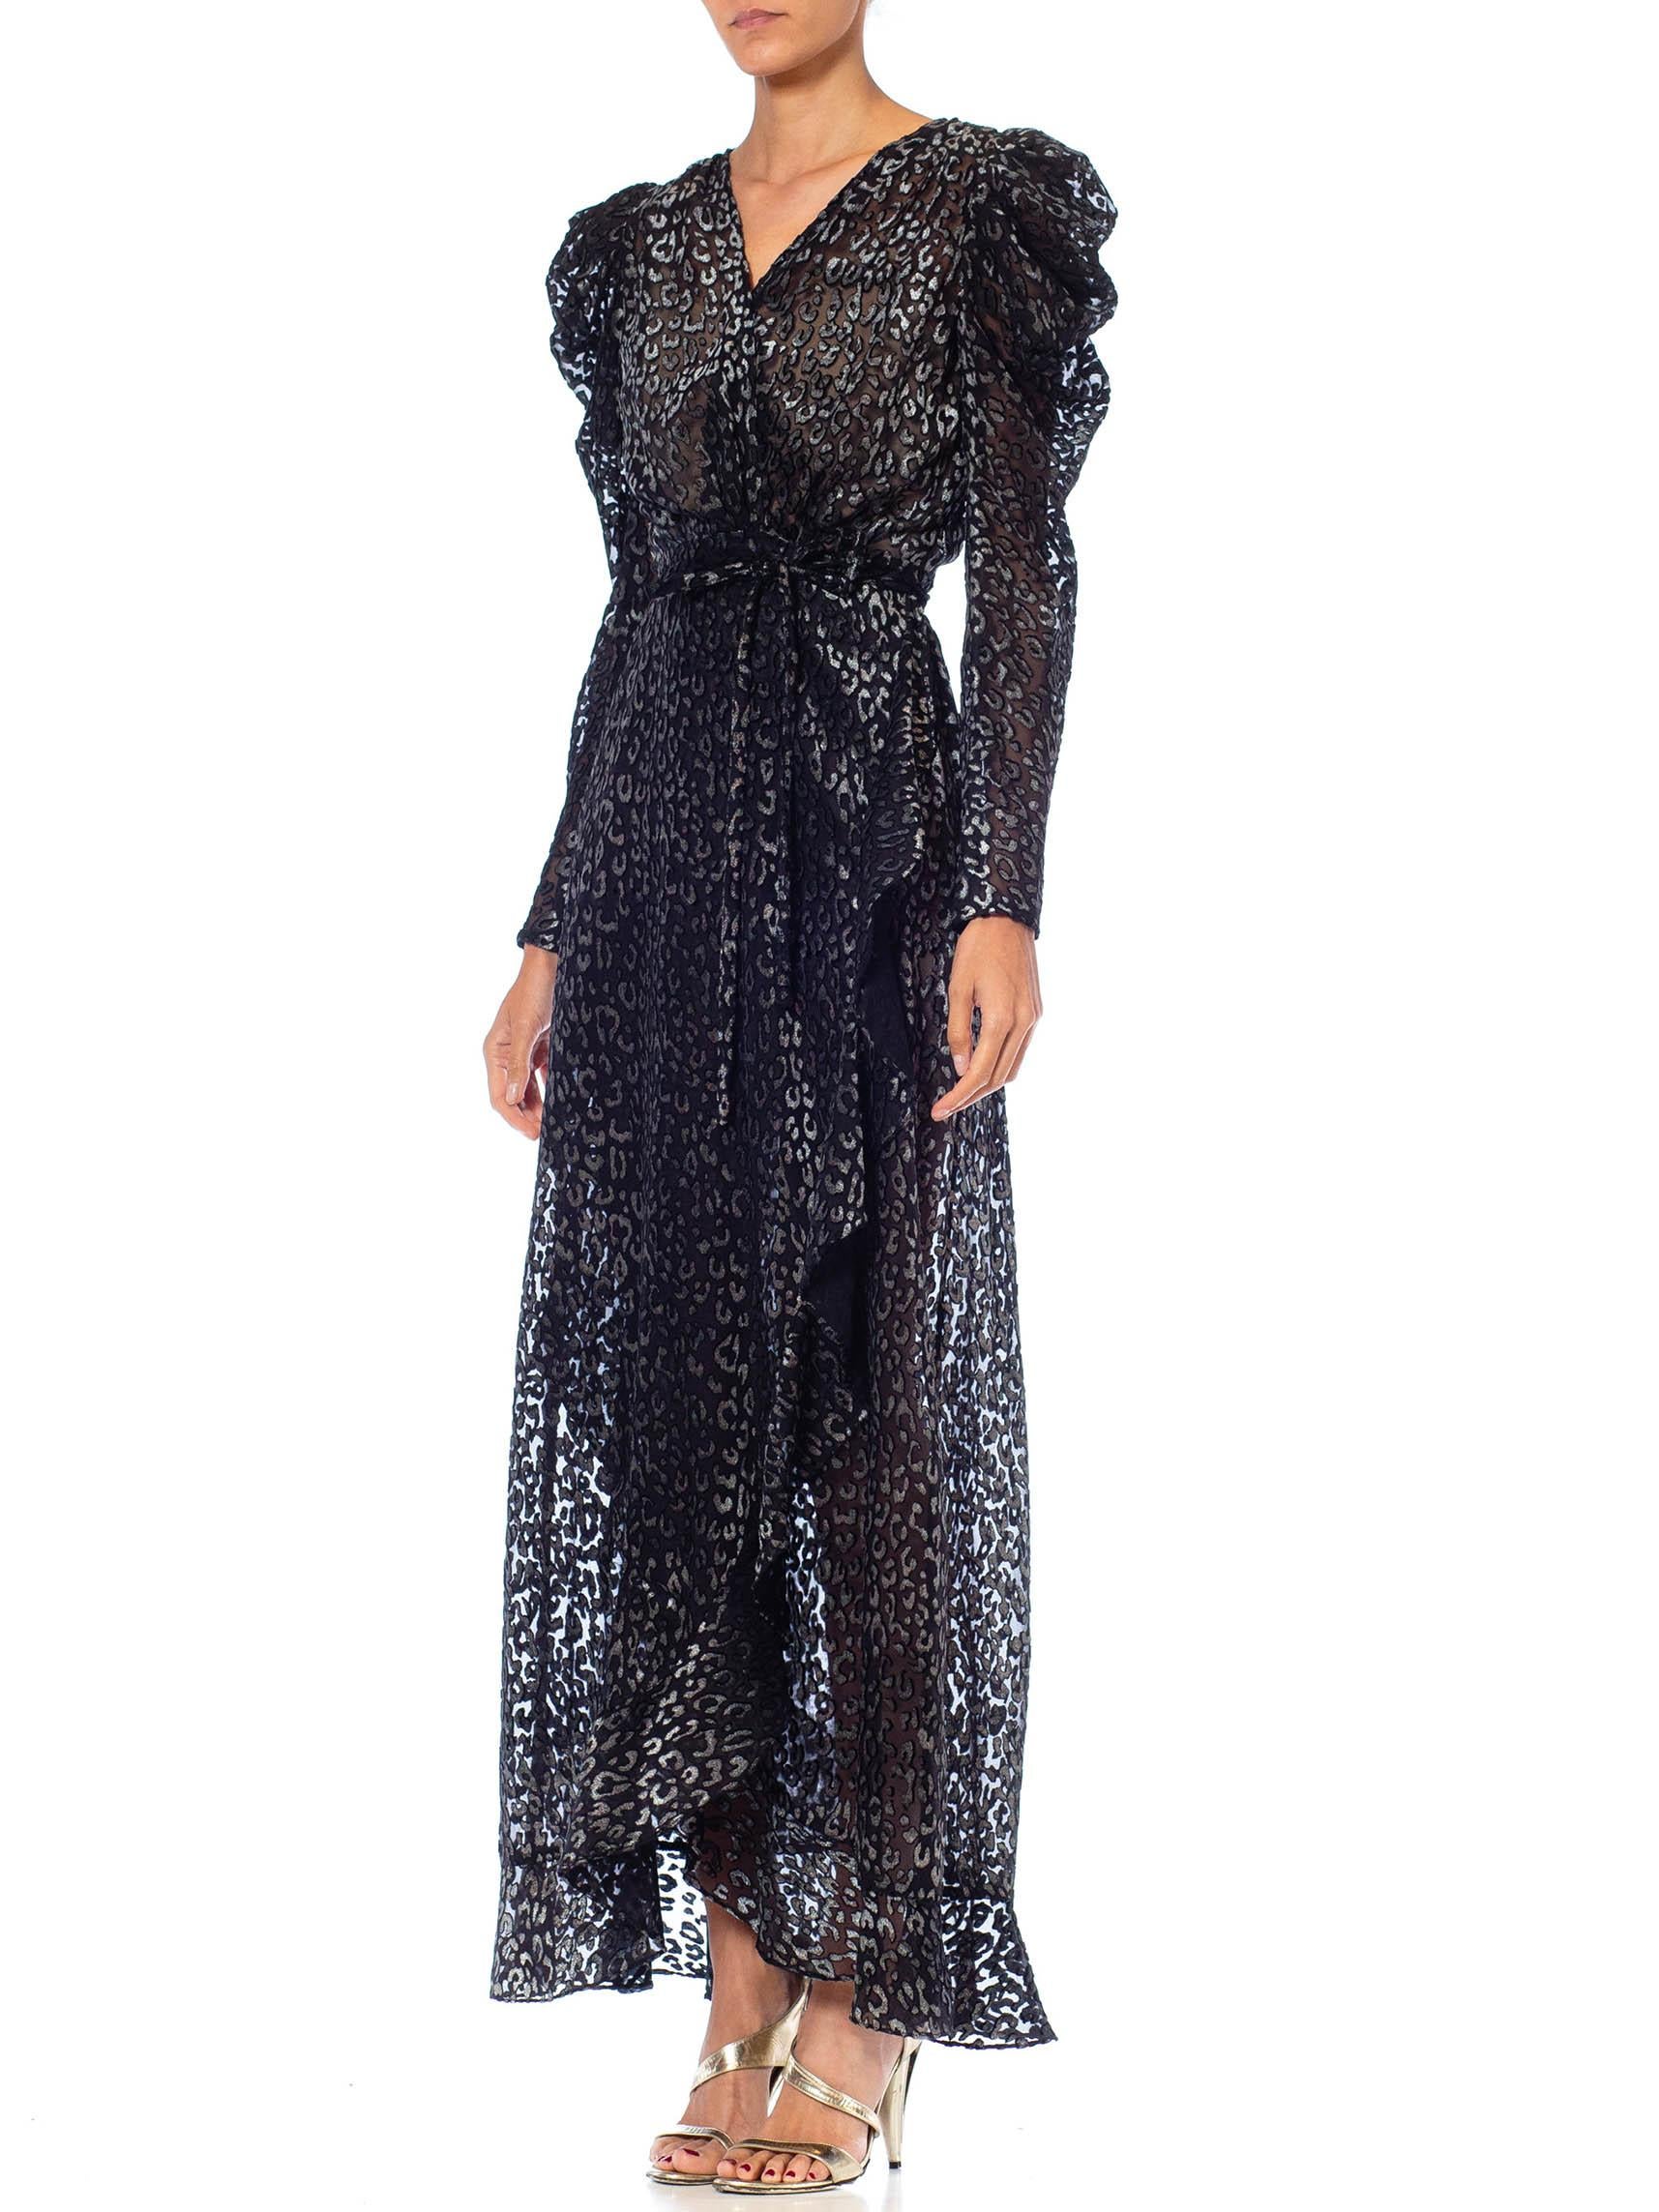 1980S Black Leopard Print Silk & Rayon Burnout Velvet Wrap Dress Gown With Slee For Sale 3